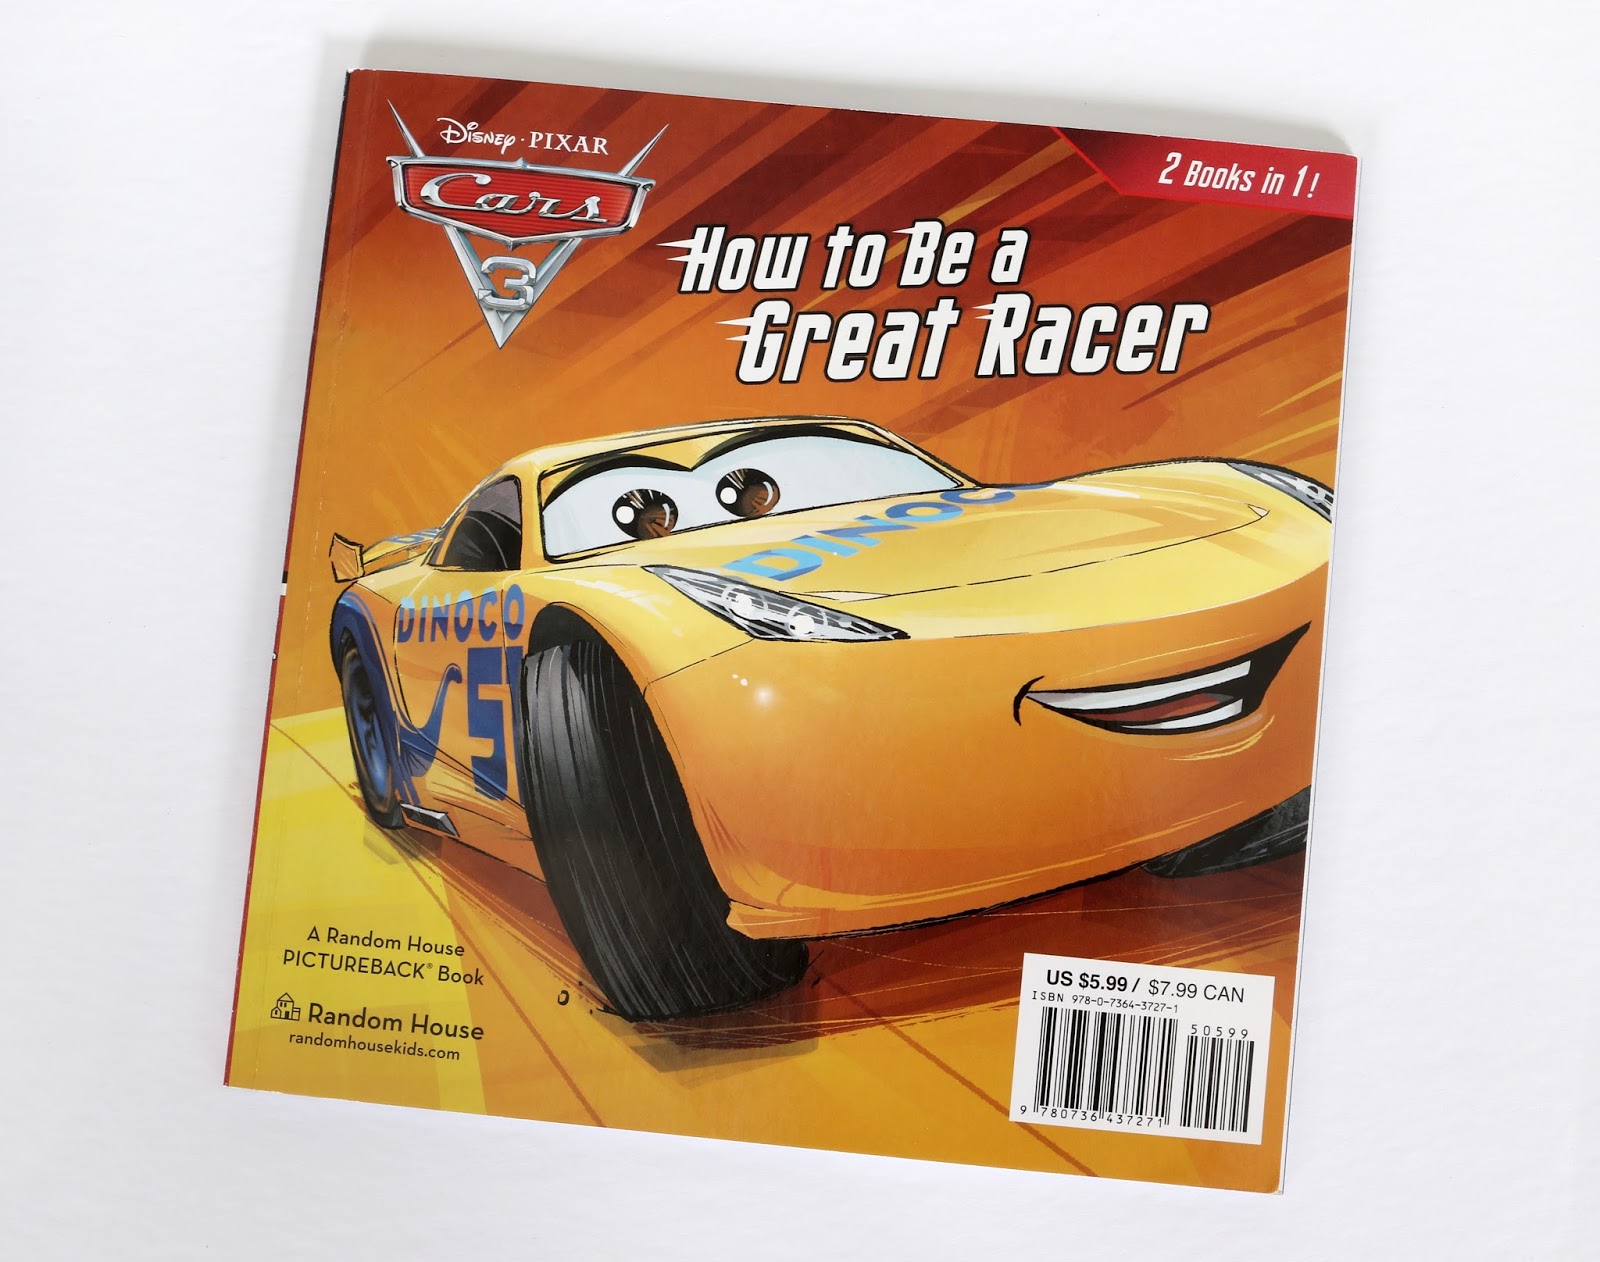 Cars 3 Taken by Storm / How to be a Great Racer 2 Books in 1 review